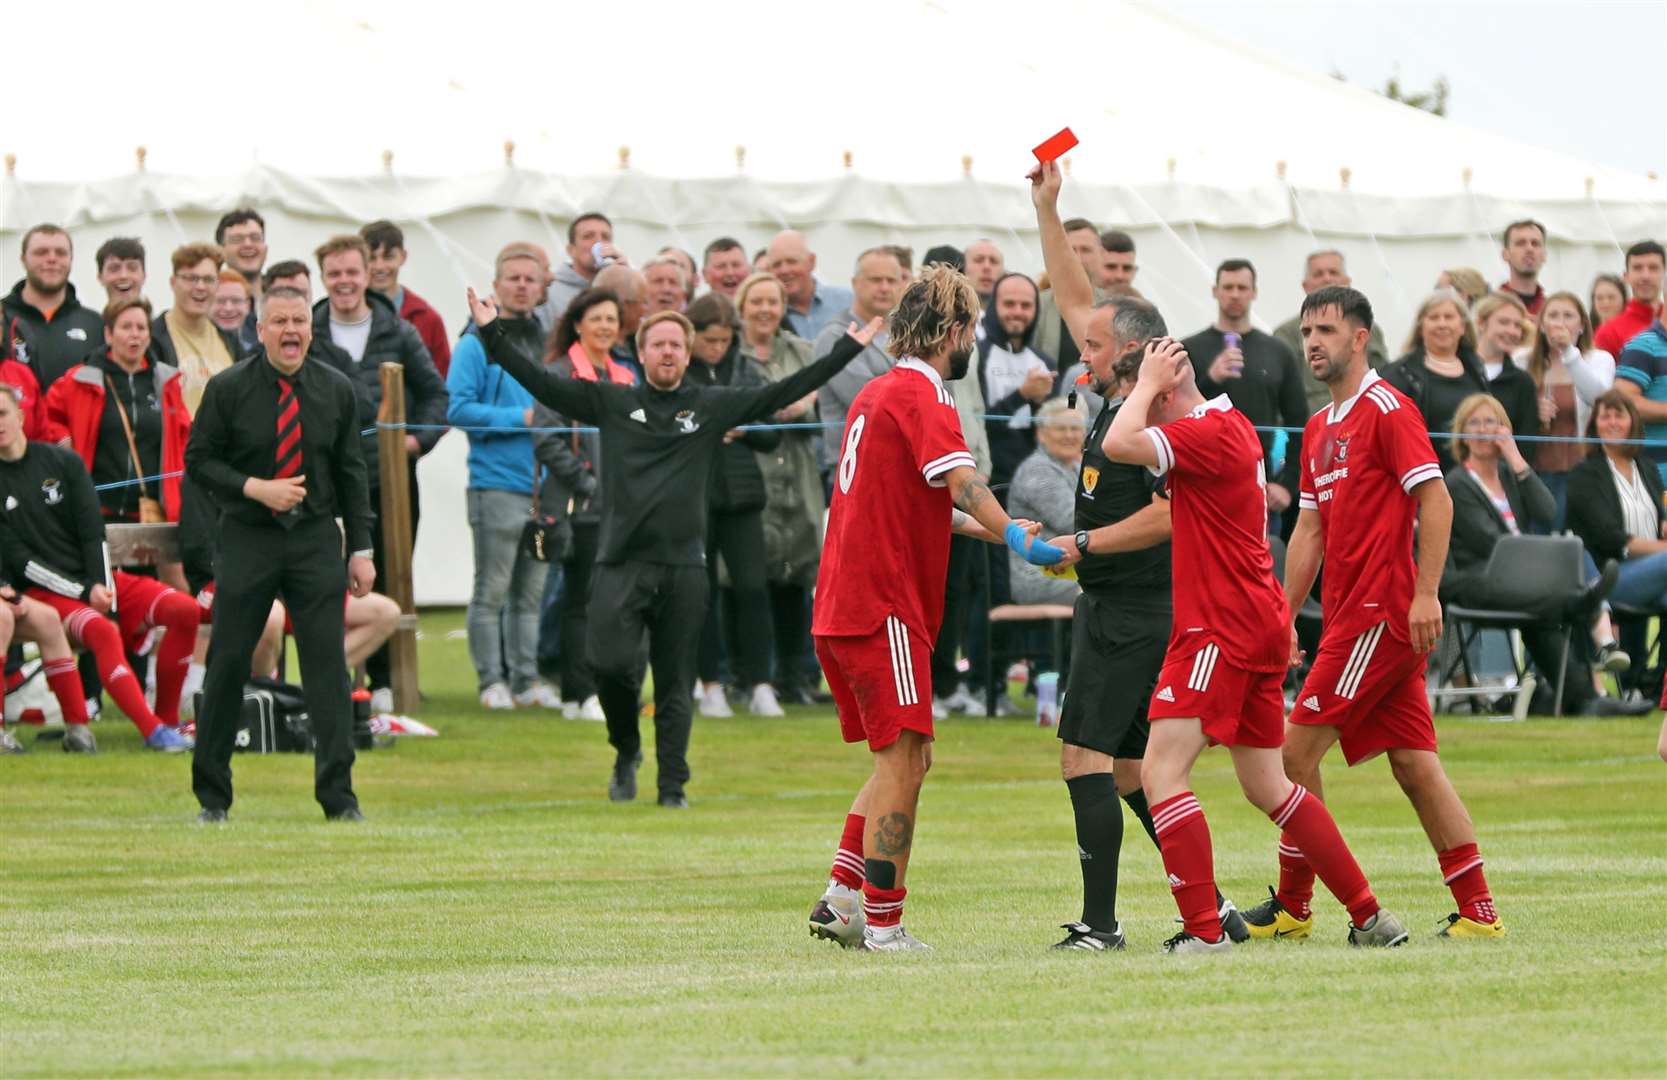 Referee Liam Bremner showing a red card to Grant MacNab of Wick Groats during last season's Eain Mackintosh Cup final at Recreation Park in Halkirk. Picture: James Gunn